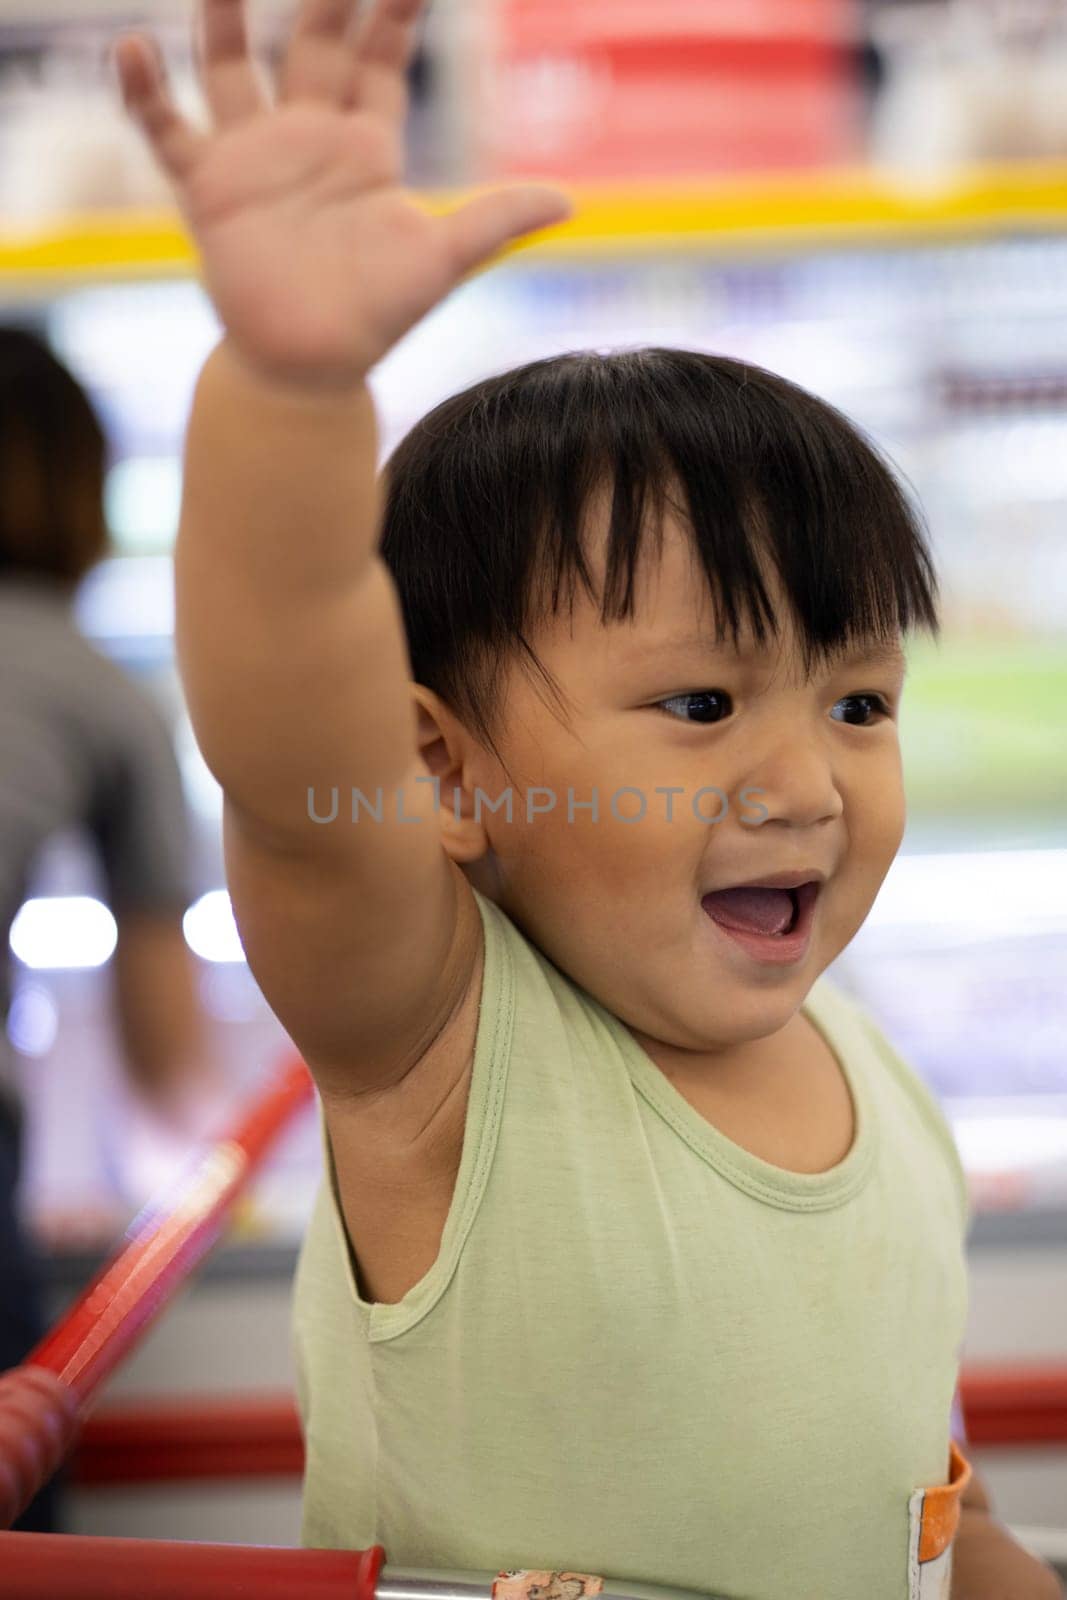 A boy shows a negative gesture with his hand forward with a sad face. Close up